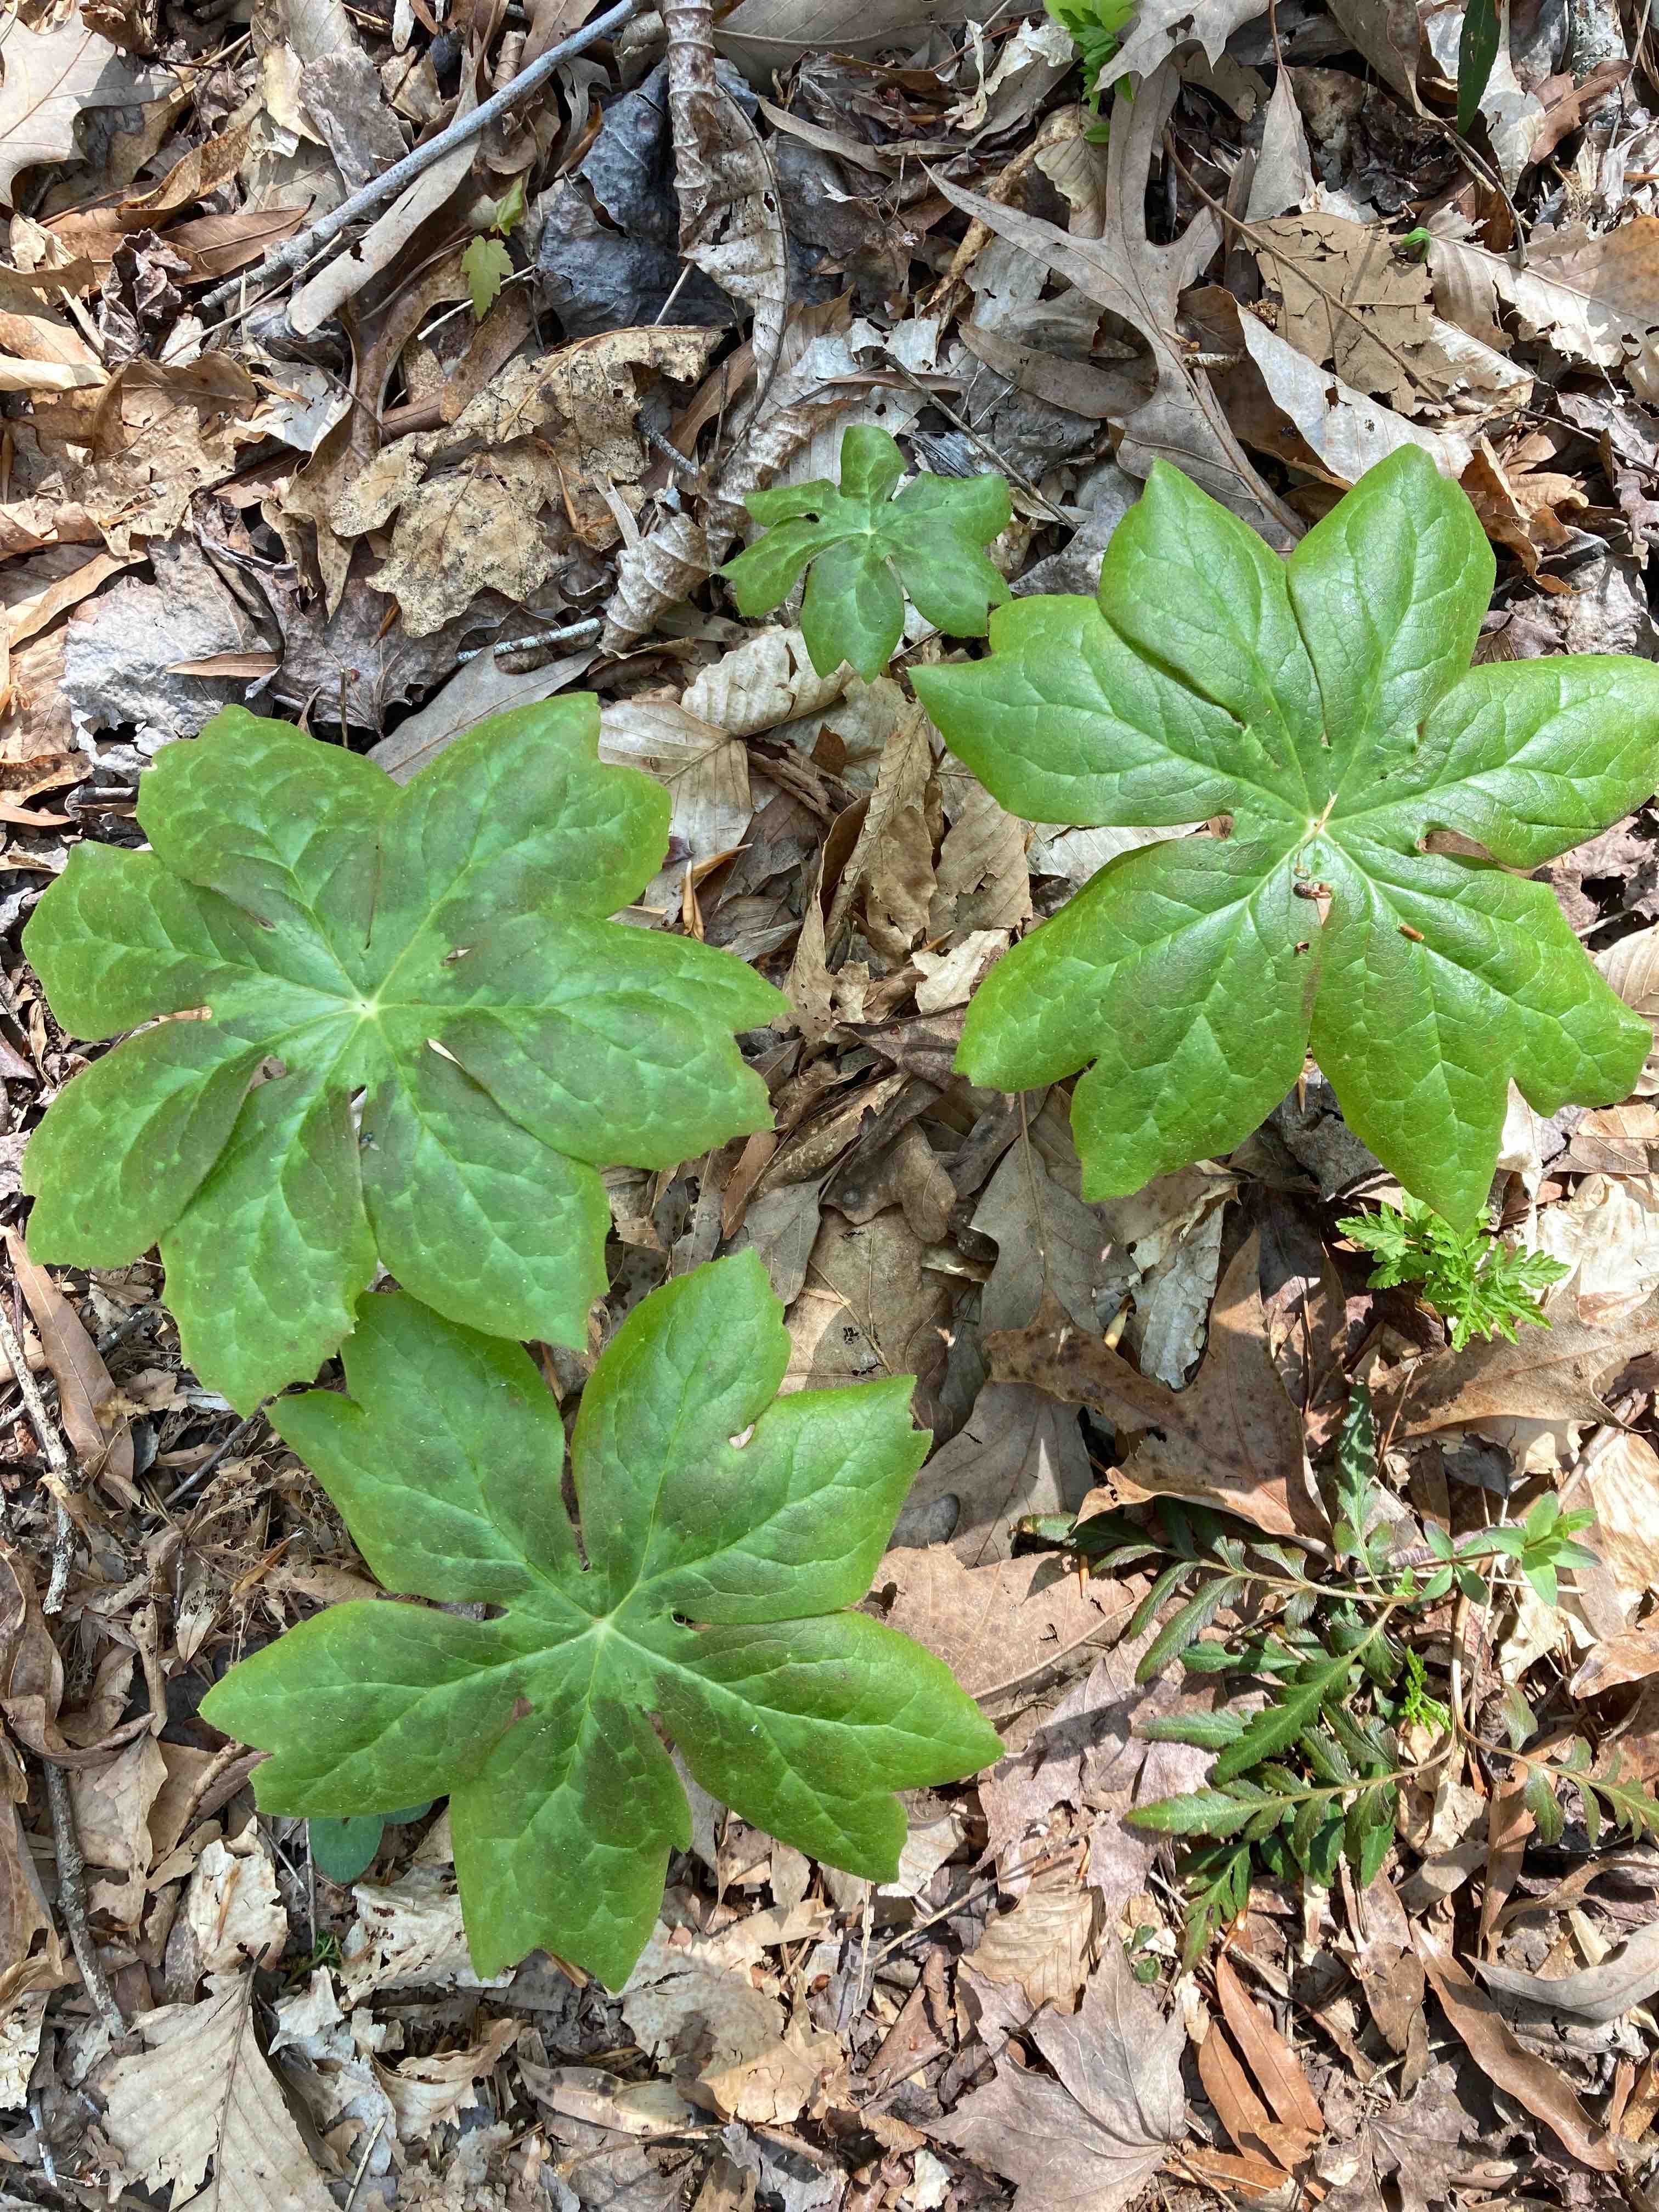 The Scientific Name is Podophyllum peltatum. You will likely hear them called Mayapple, May-apple, American Mandrake, Wild Mandrake, Indian Apple, Pomme de Mai, Podophylle Pelt. This picture shows the The peltate leaves can be somewhat variegated, especially when newly emerged. of Podophyllum peltatum